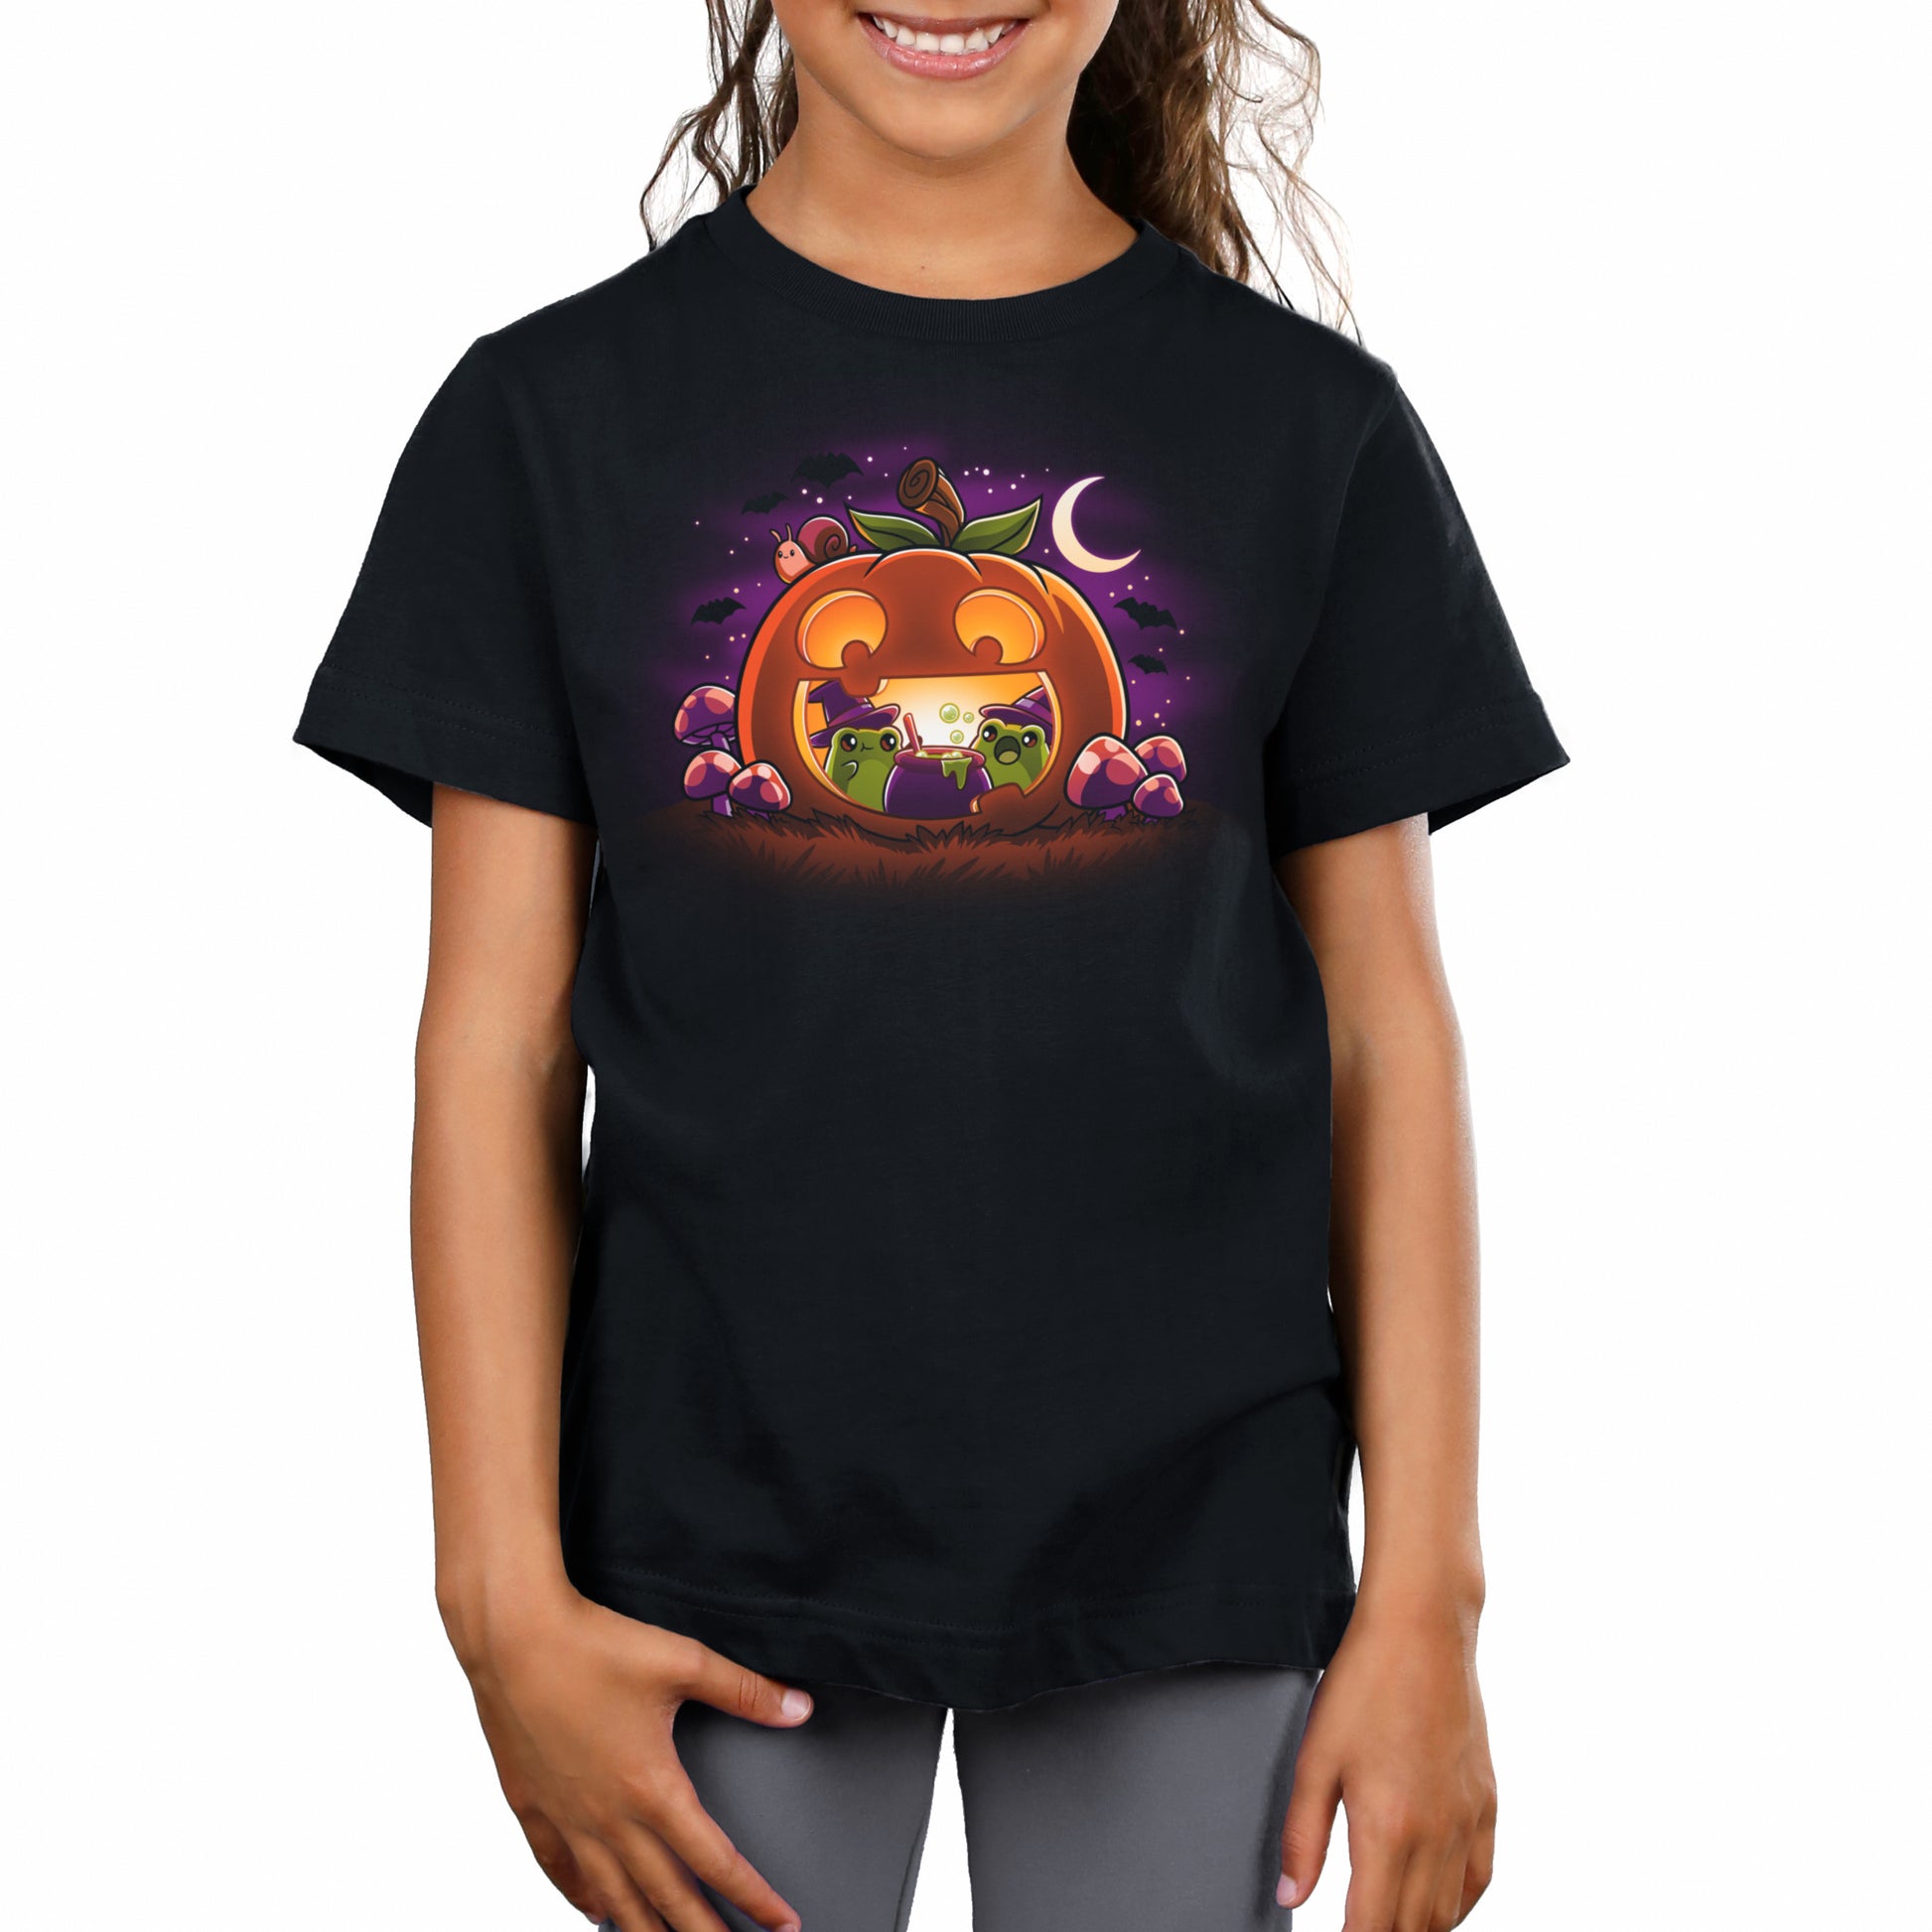 A girl wearing a comfortable TeeTurtle Halloween t-shirt with an image of Pumpkin Frog Witches.